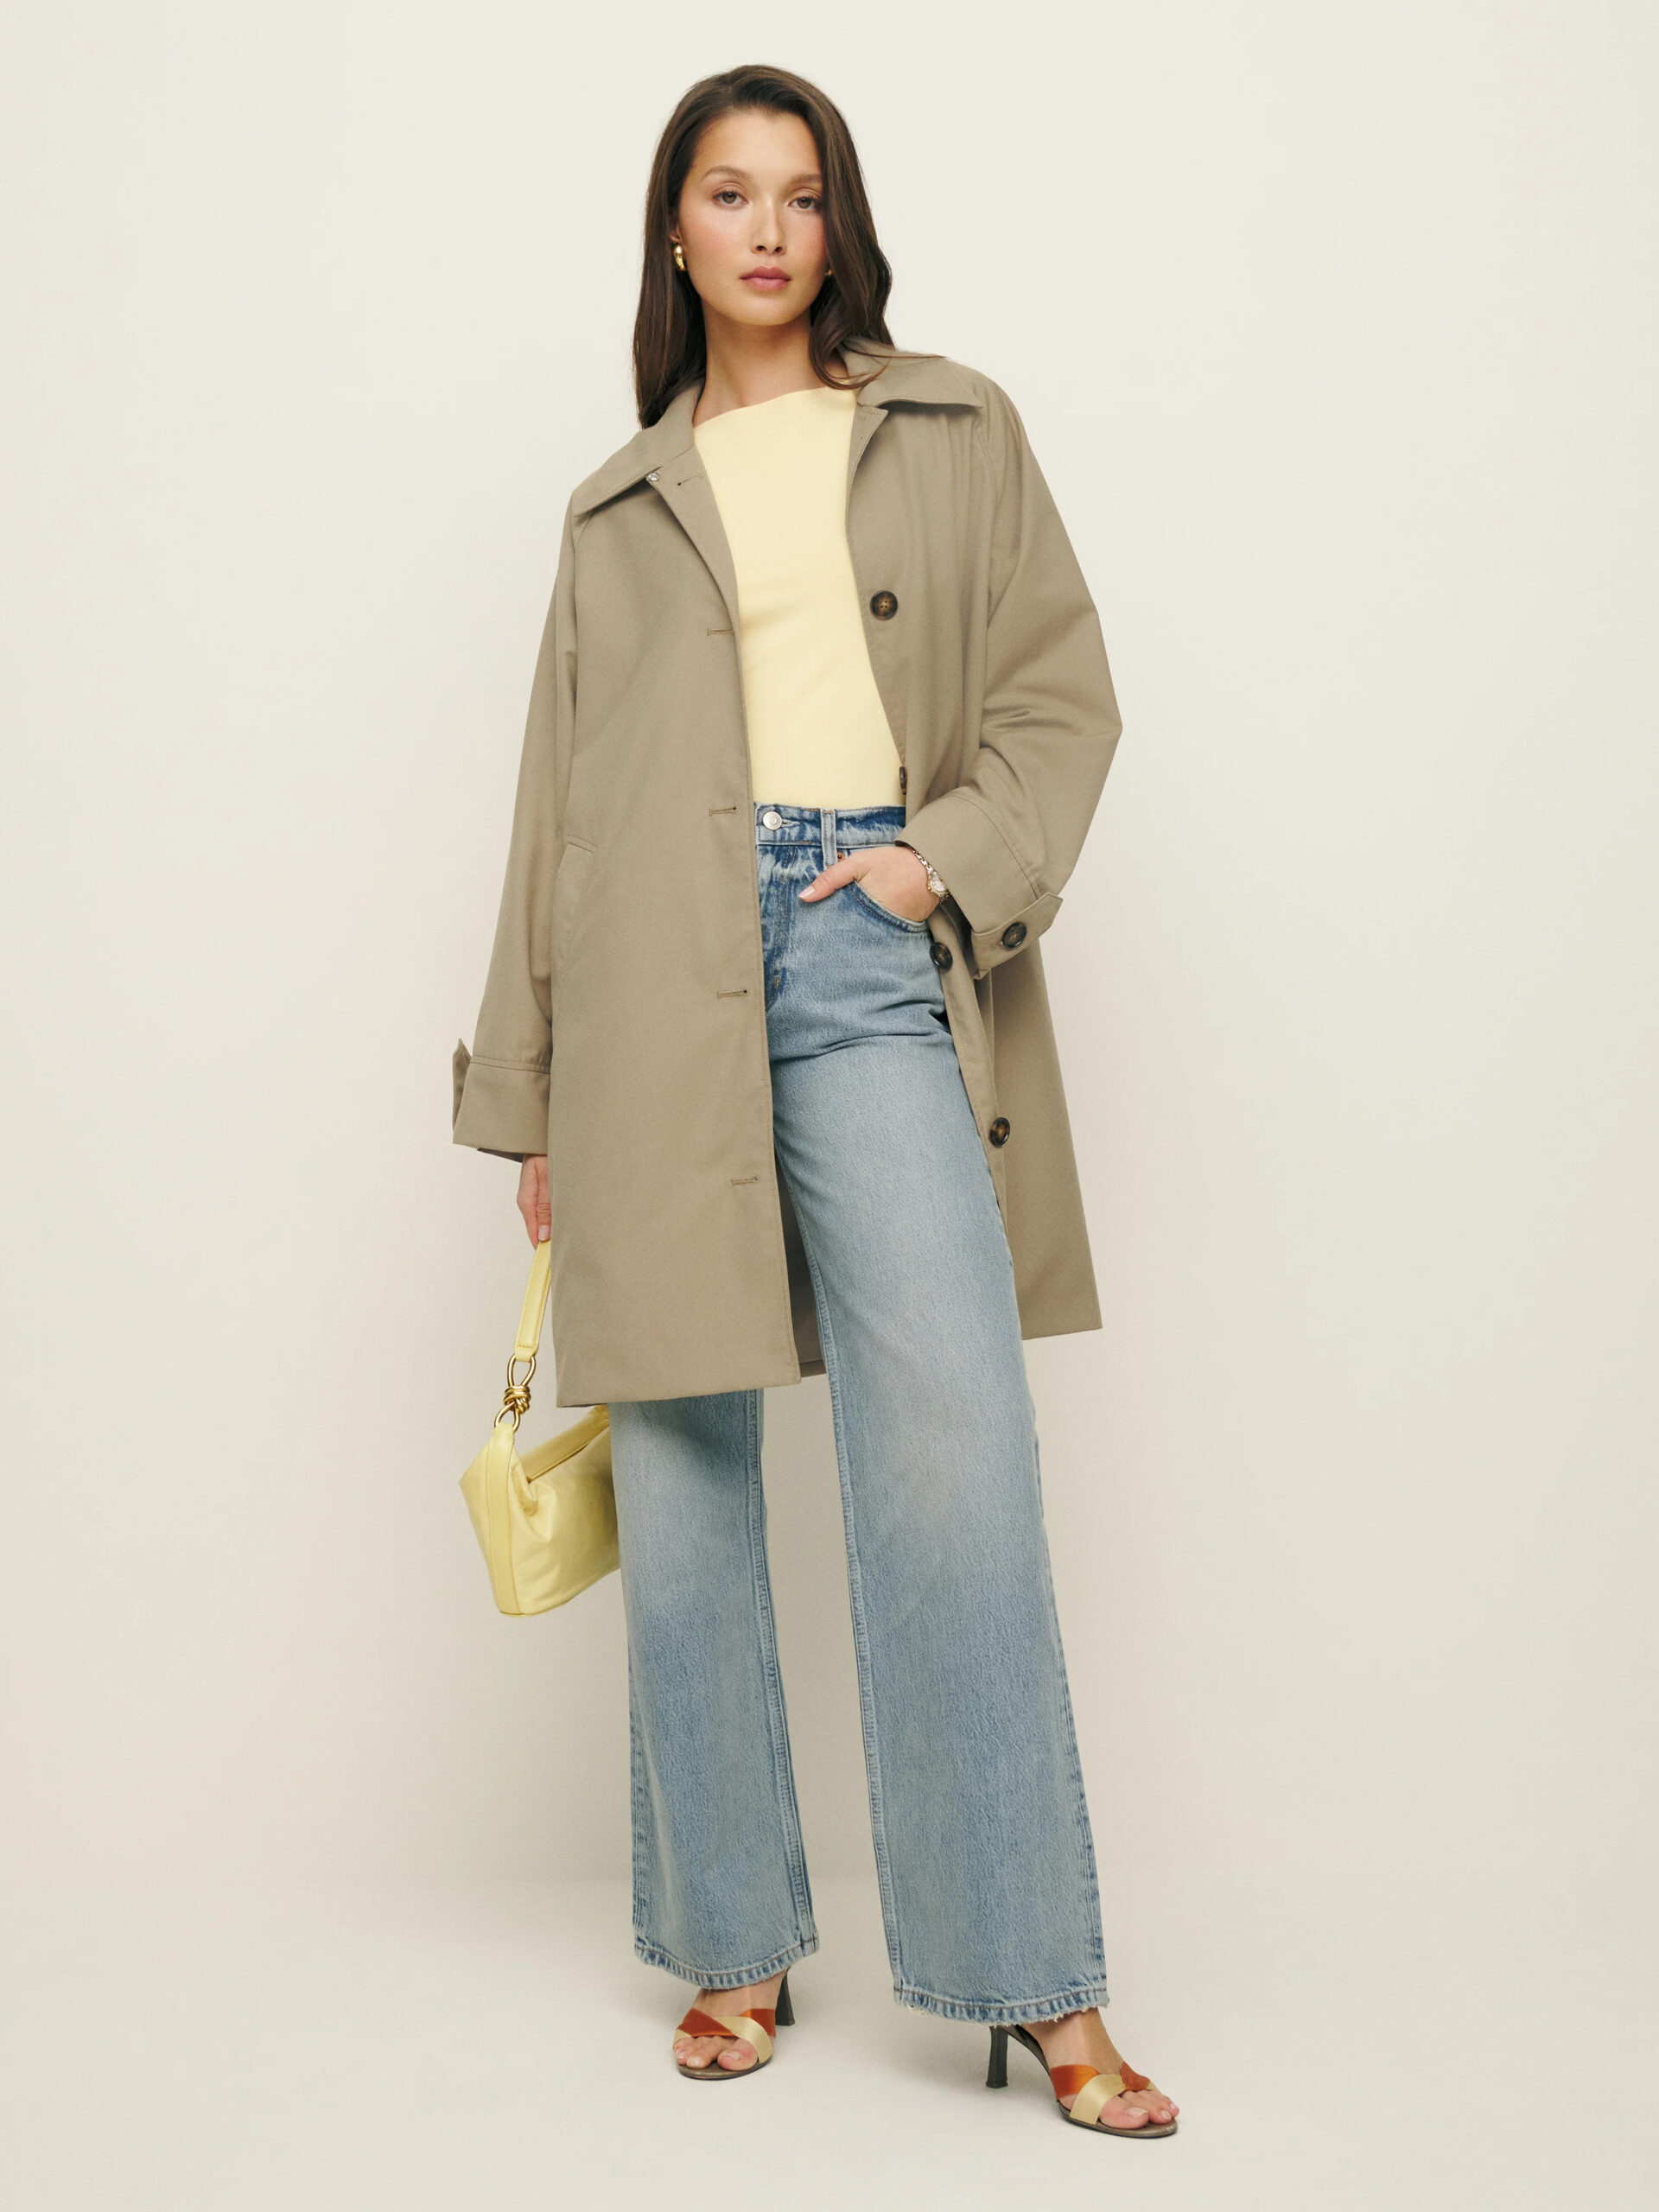 A model wearing a trench coat and wide leg jeans.